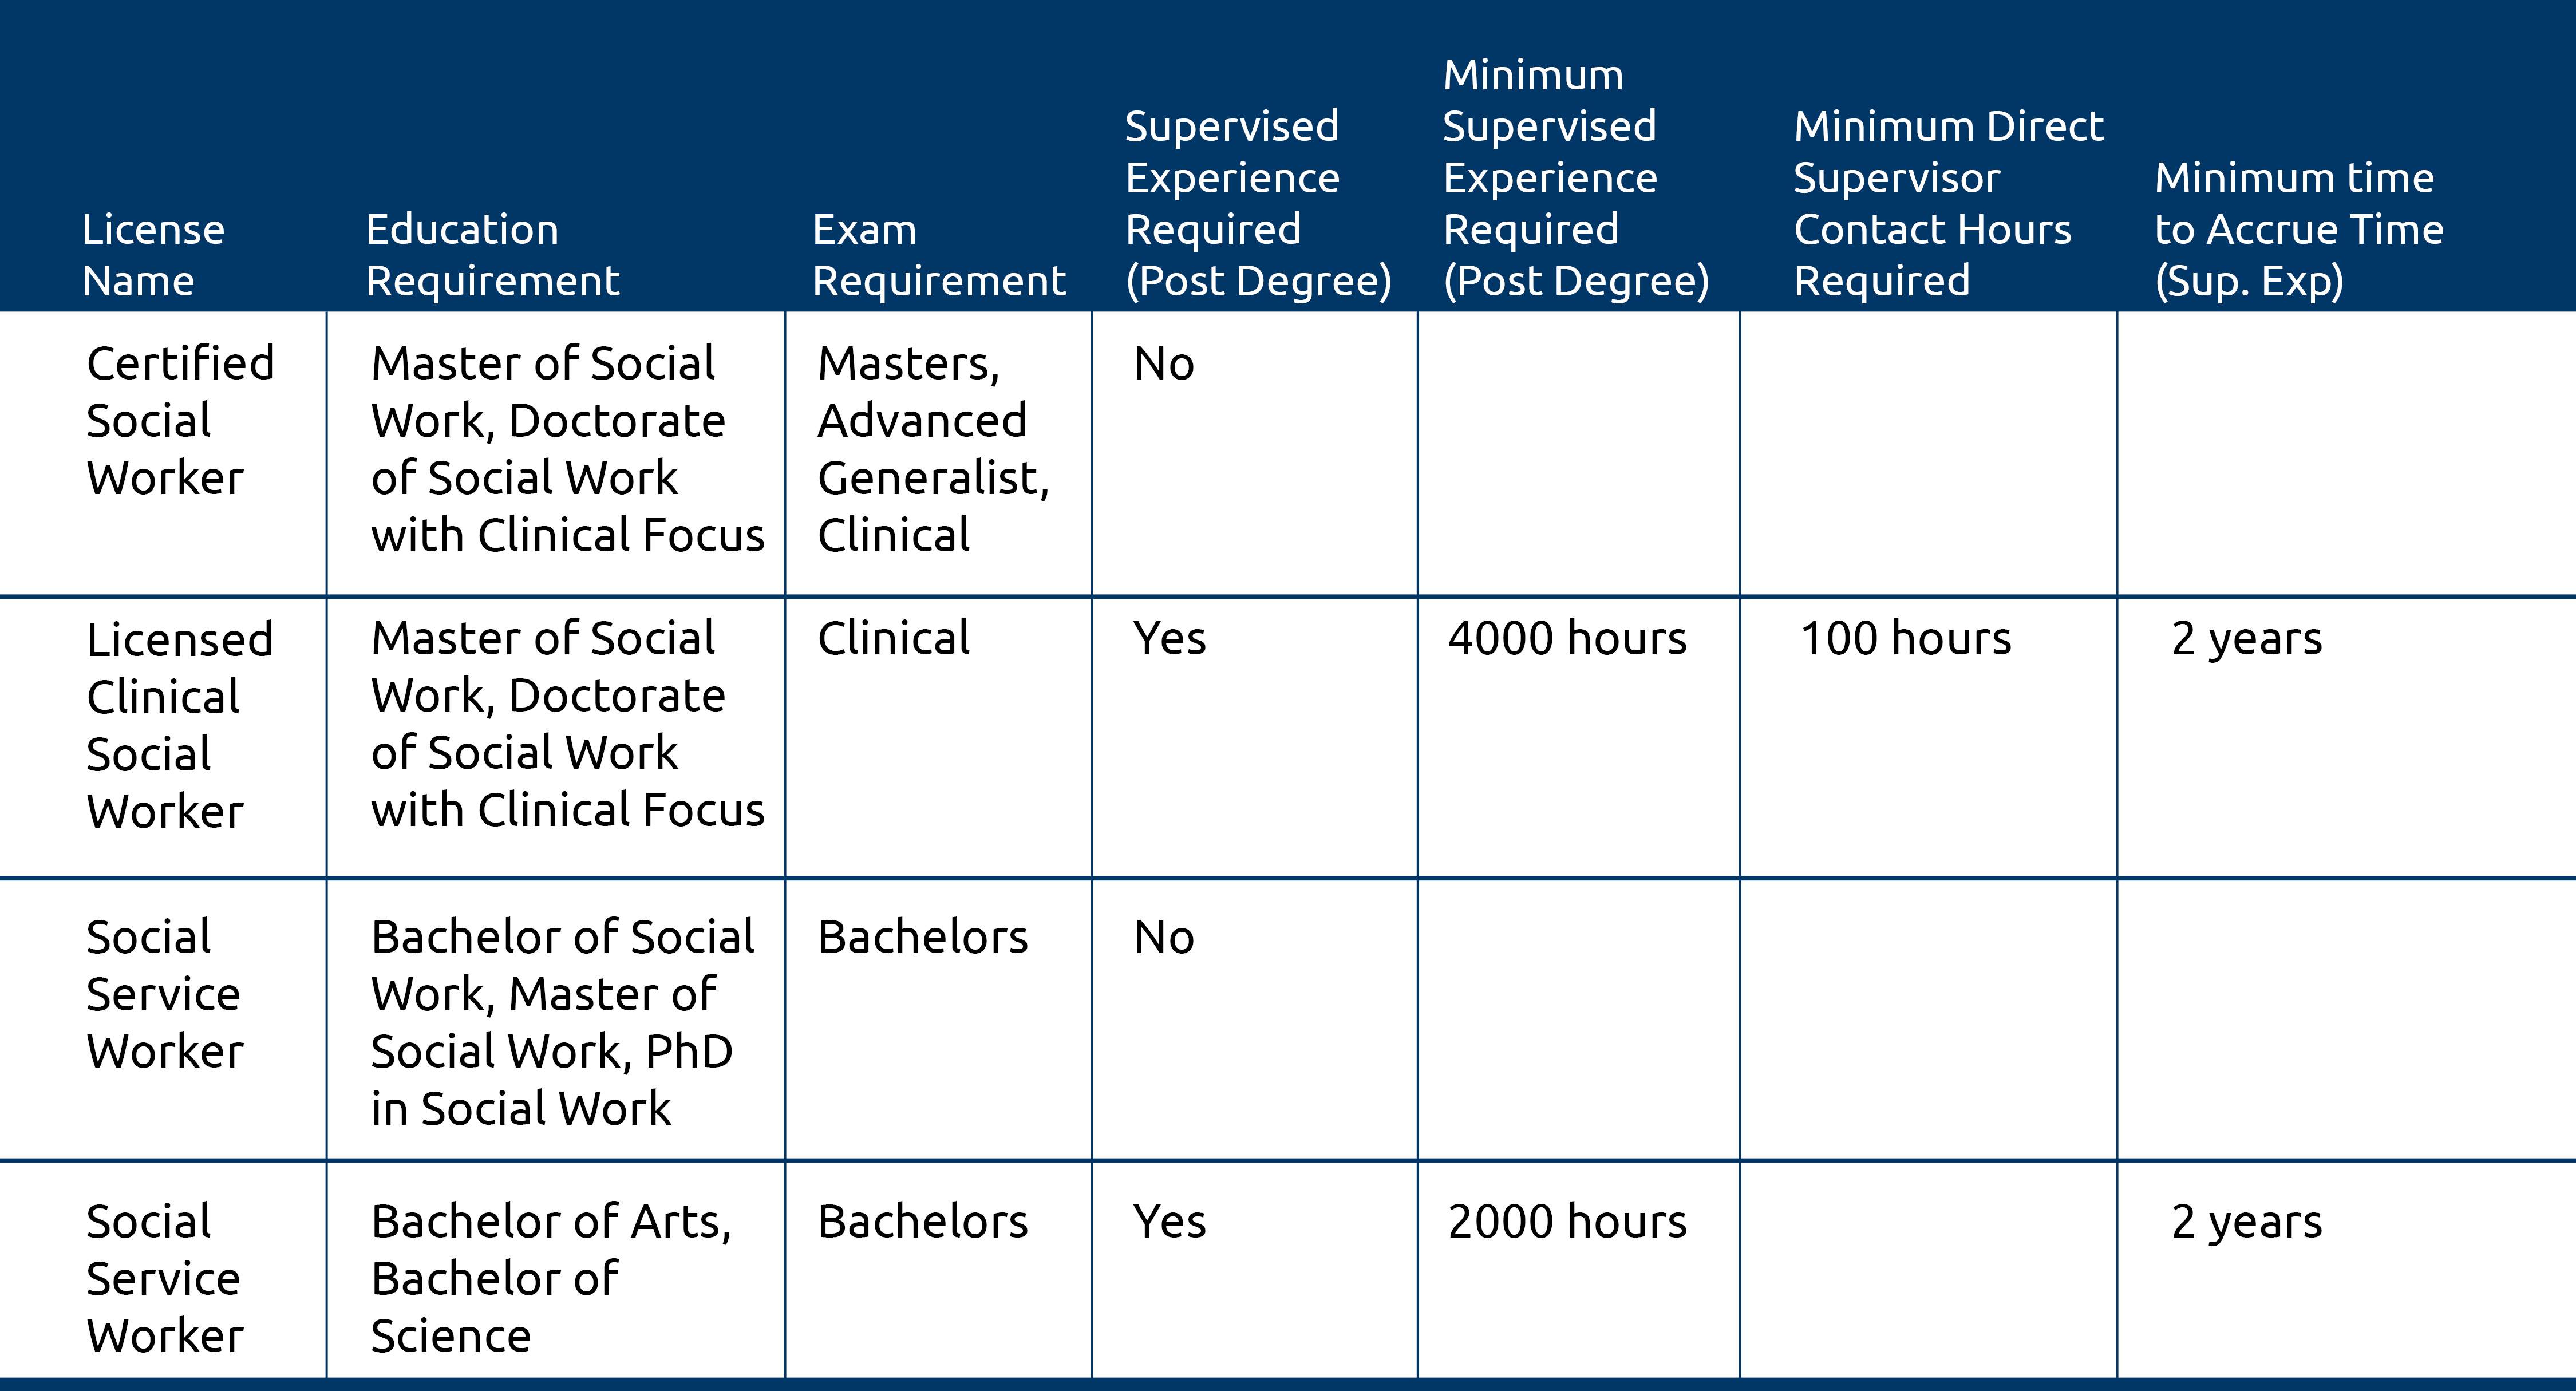 Social worker courses requirements